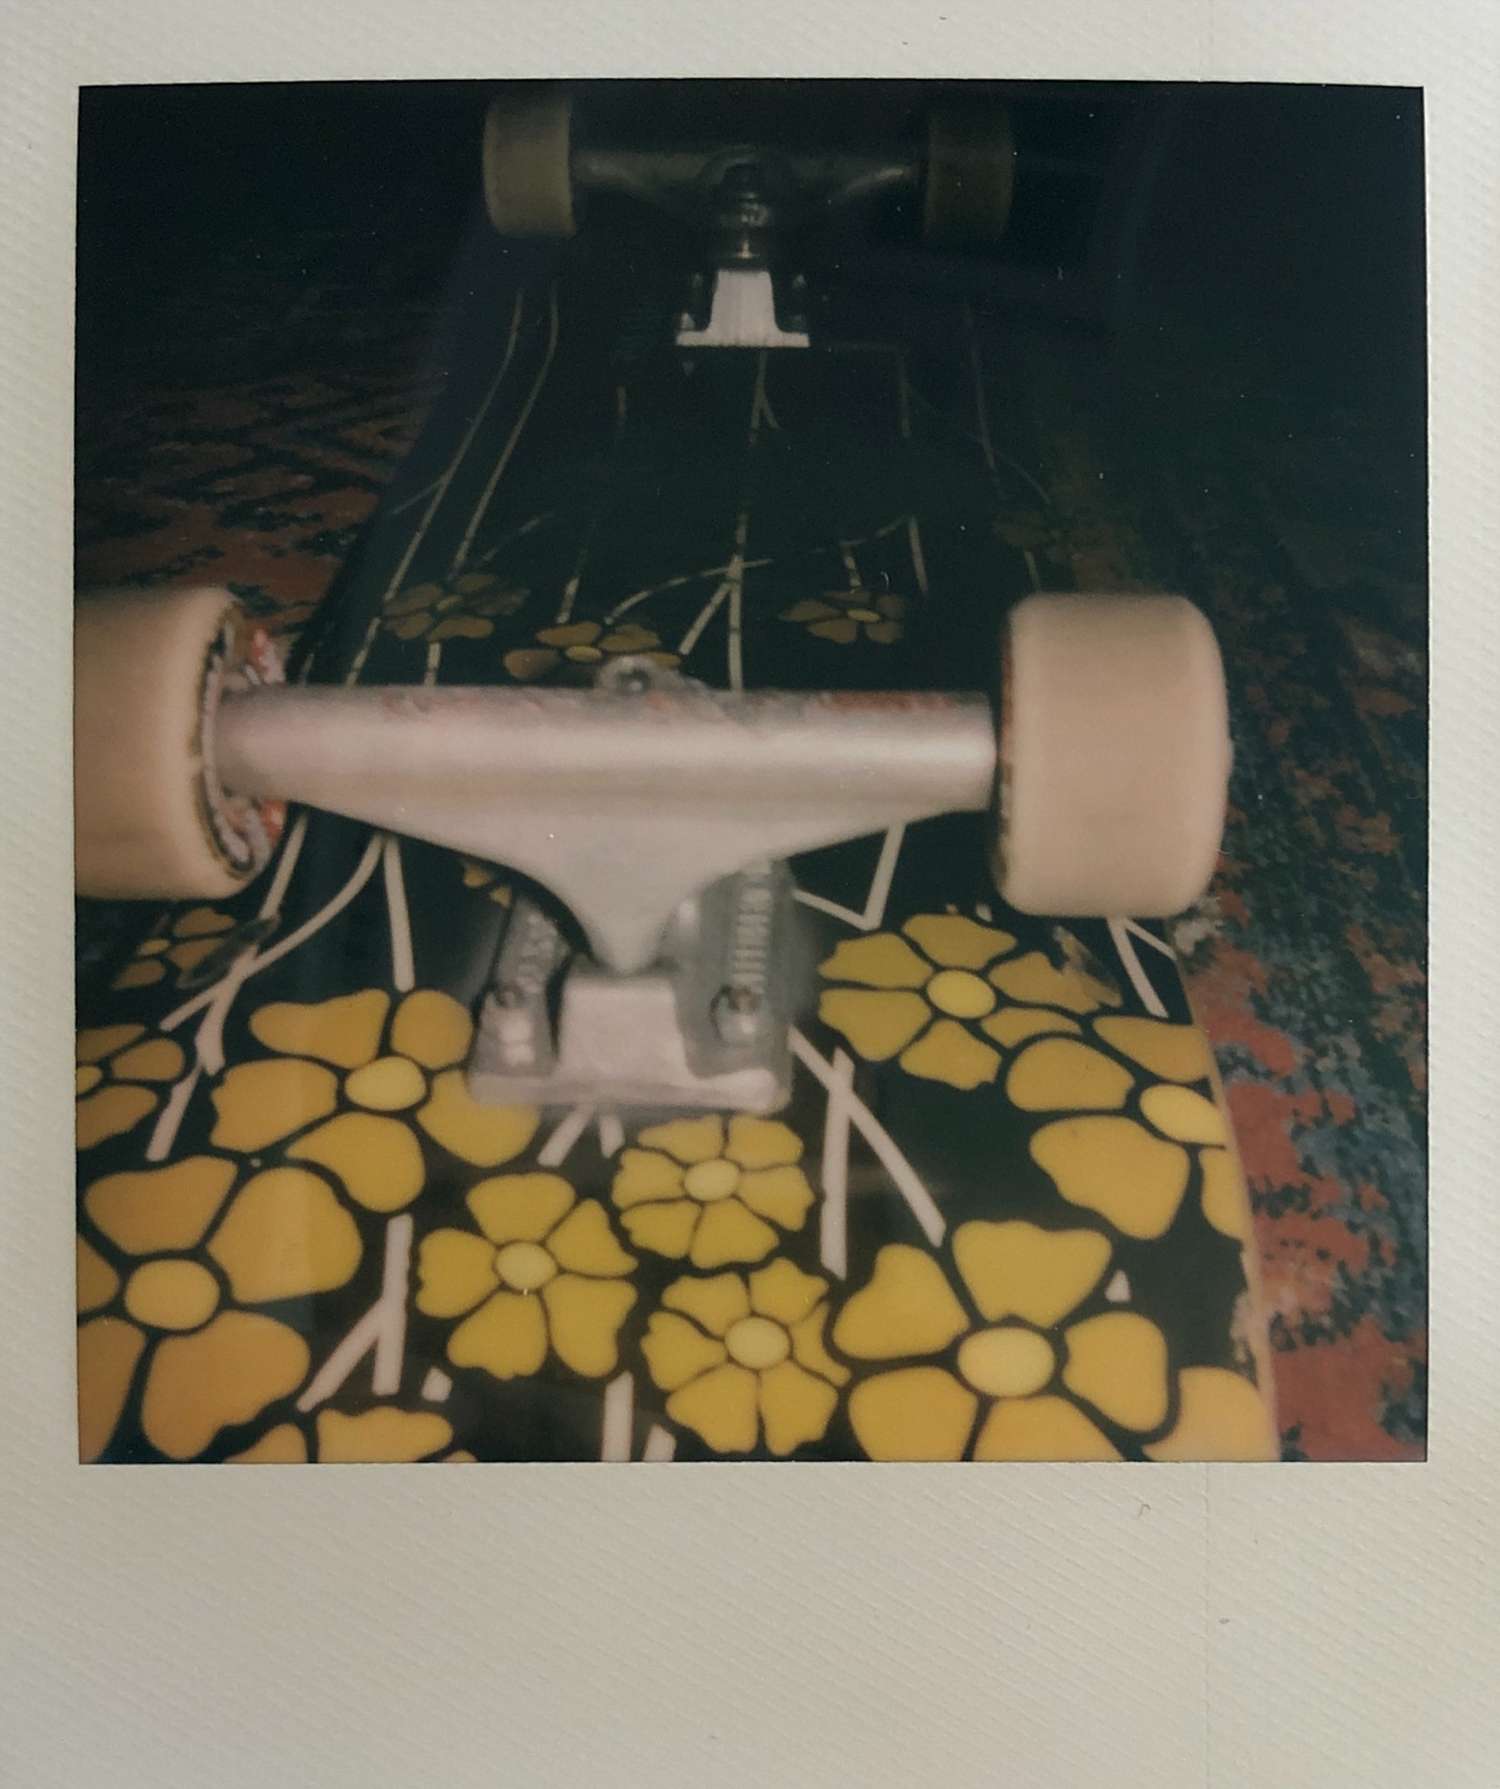 A Polaroid photo of my skateboard laying on a rug in my apartment